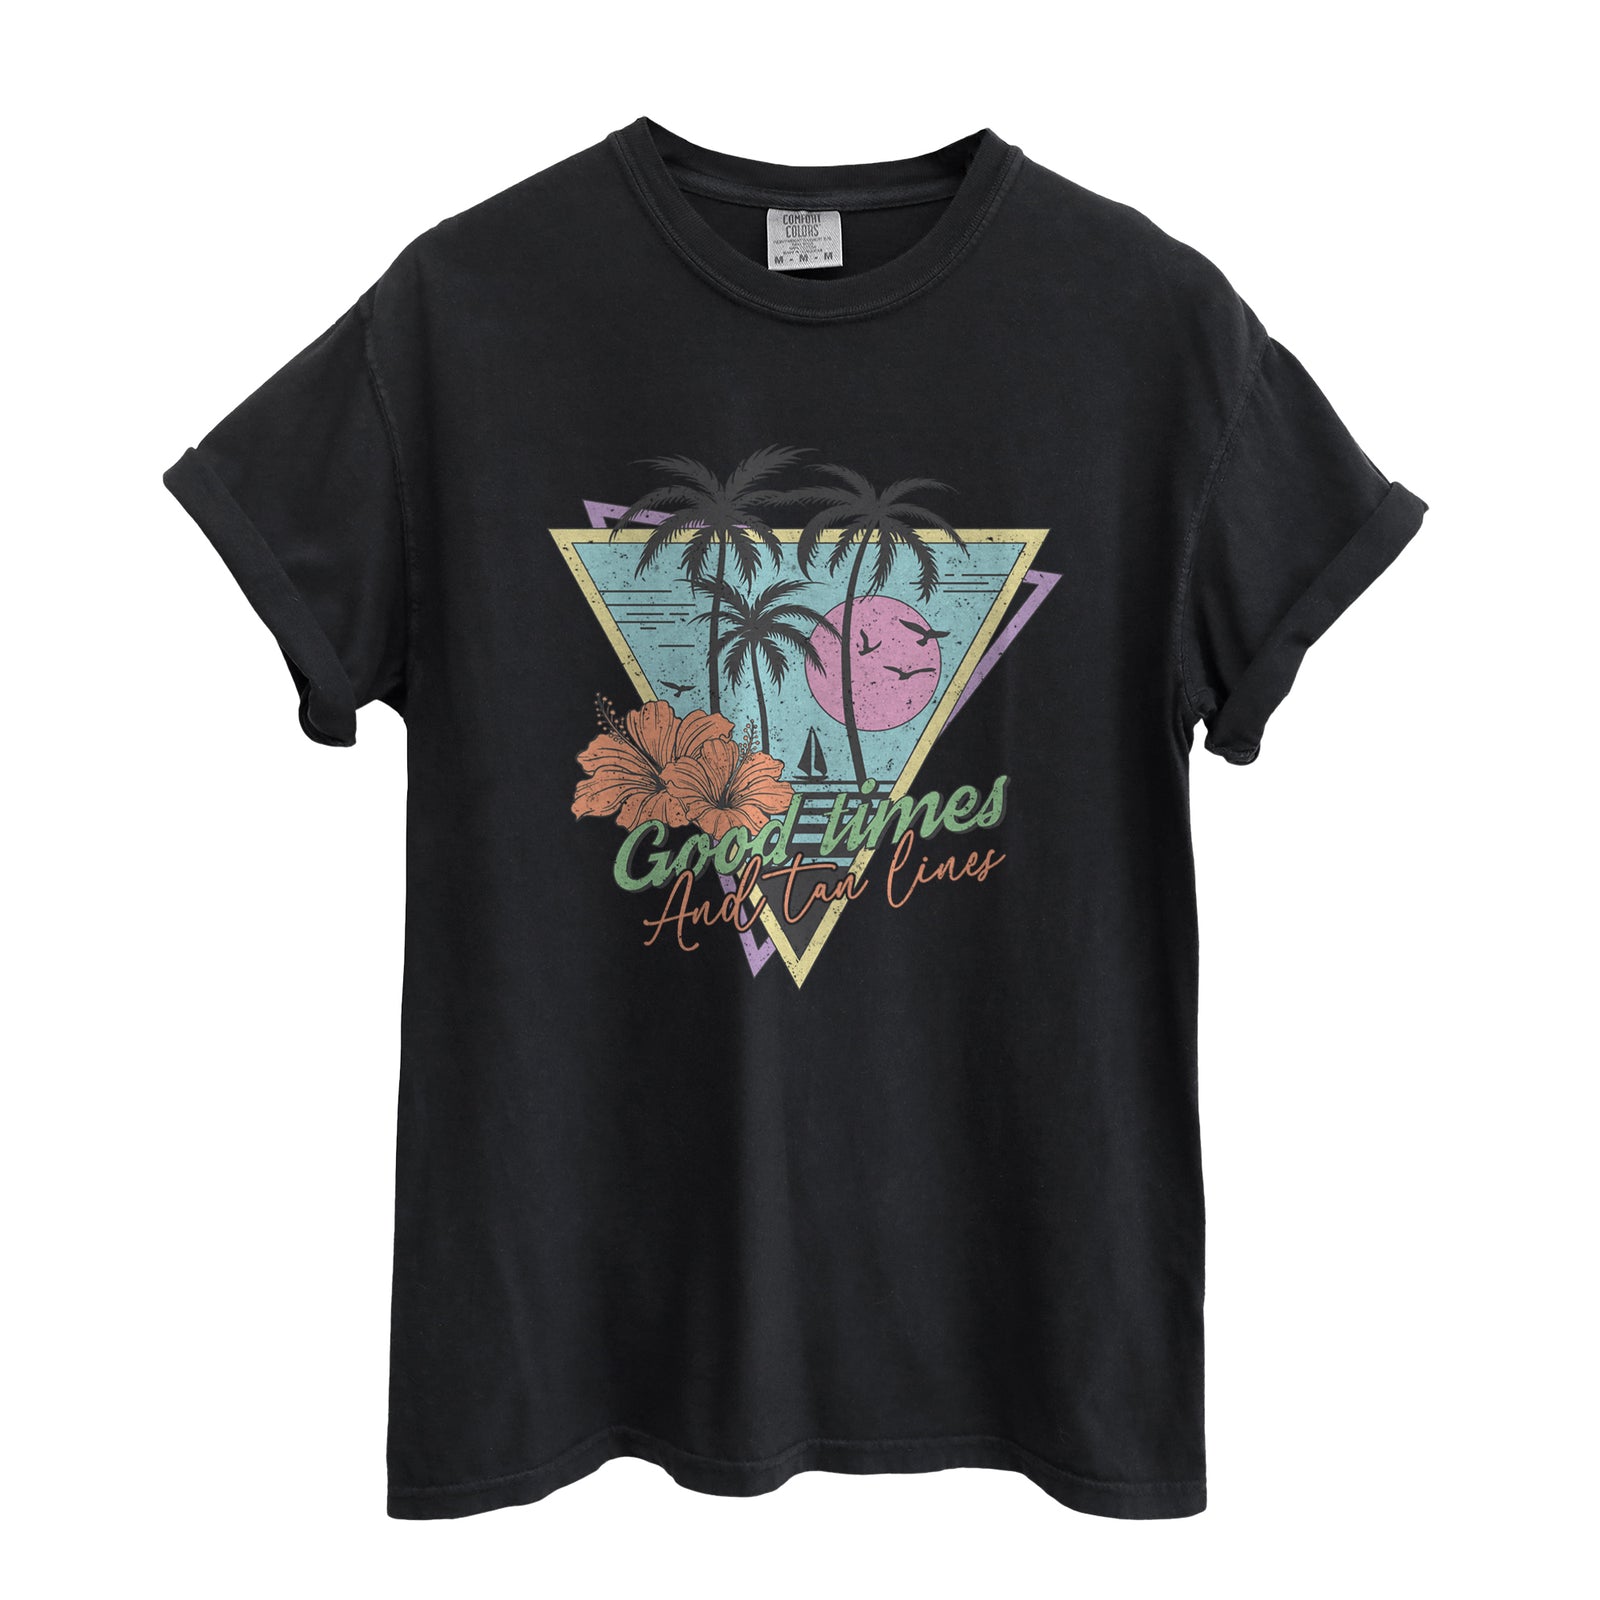 Good Times and Tan Lines Oversized Shirt for Women Garment-Dyed Graphic Tee